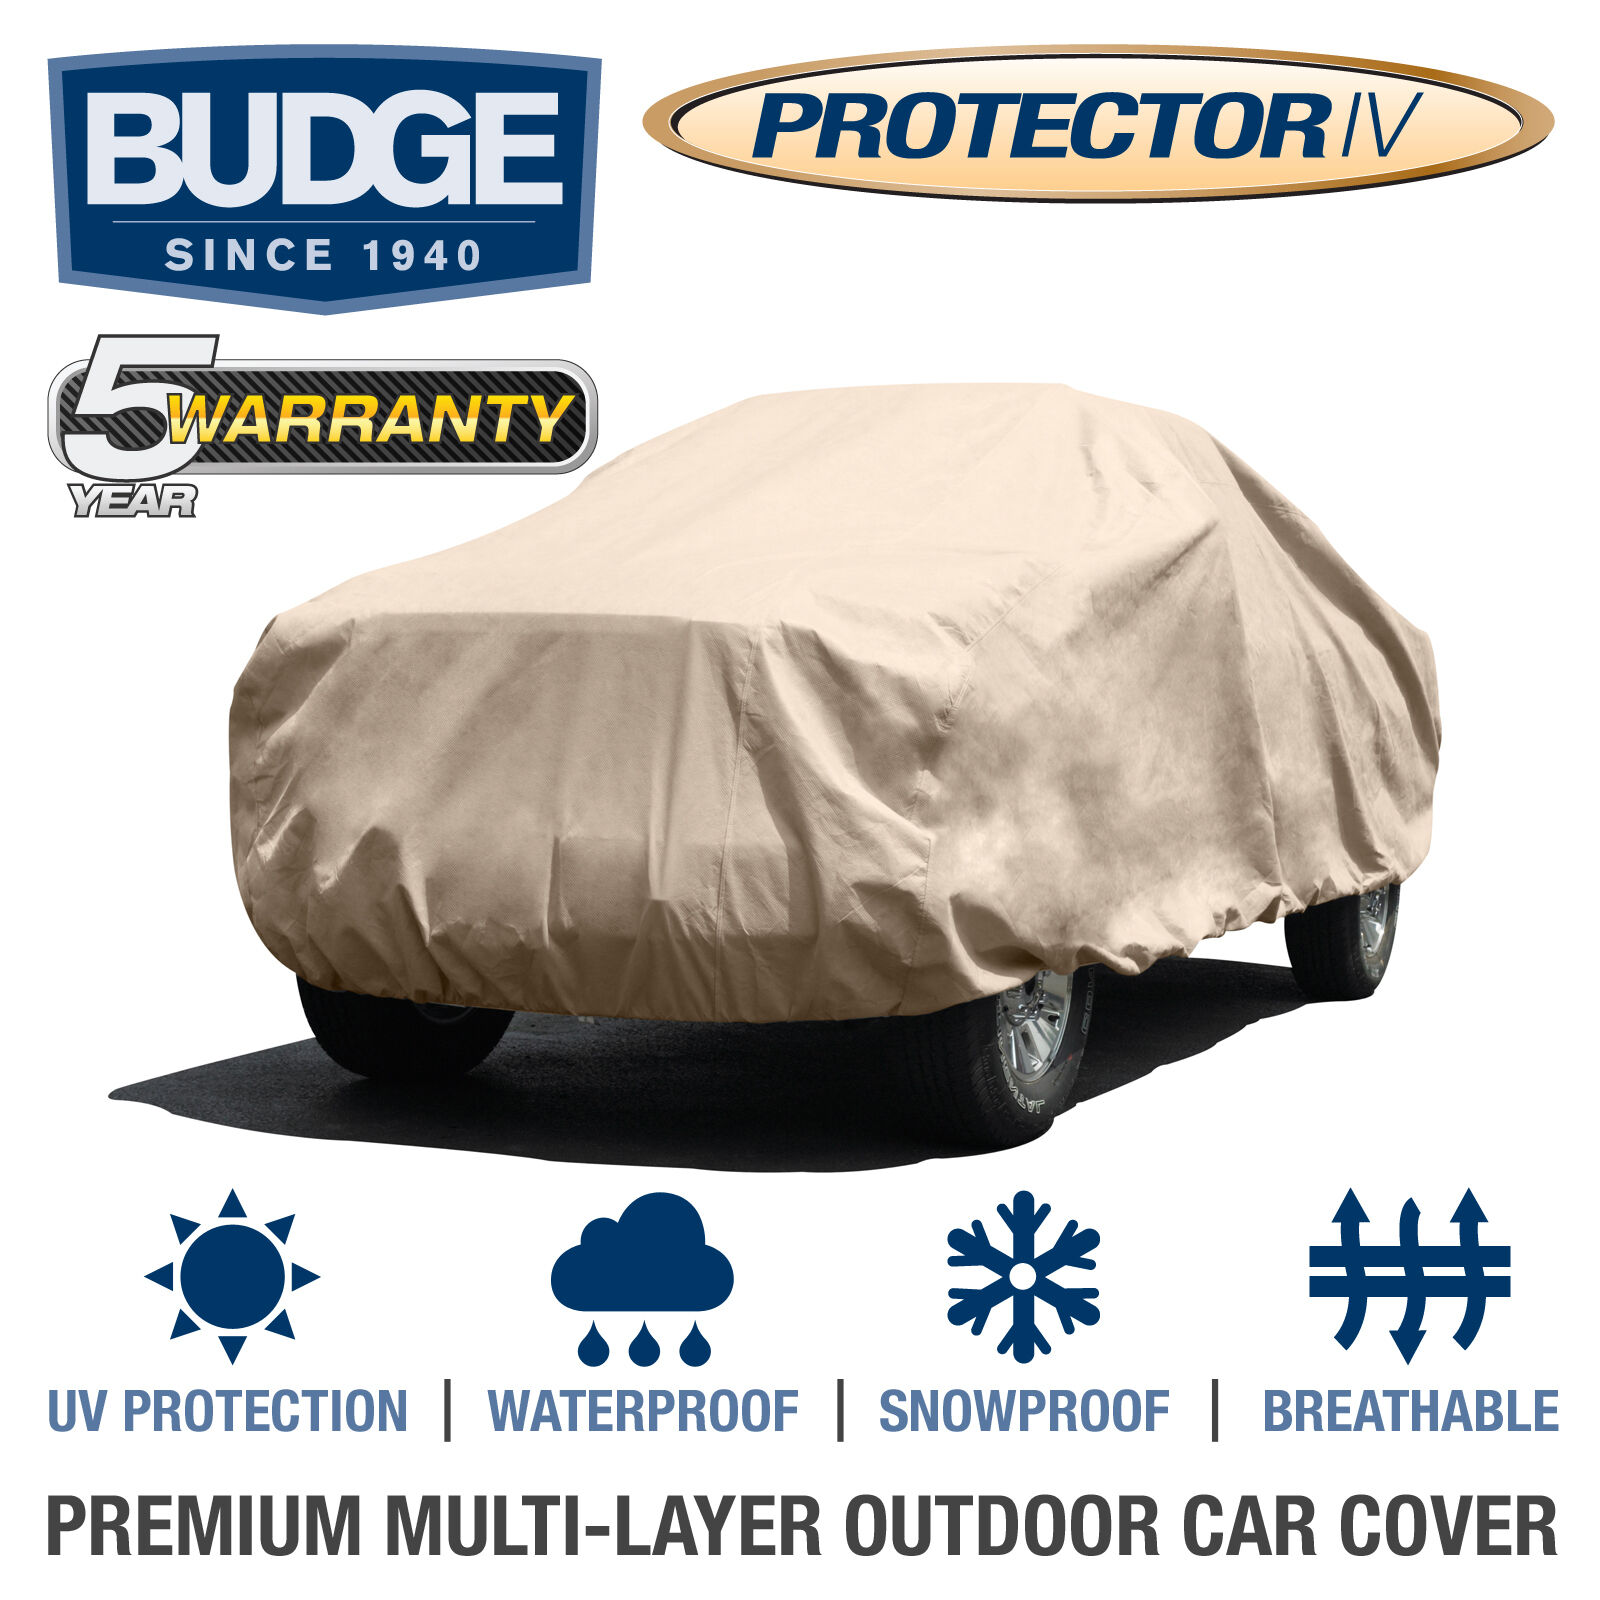 Budge Protector IV Truck Cover Fits Crew Cab Long Bed up to 22\' Long |Waterproof